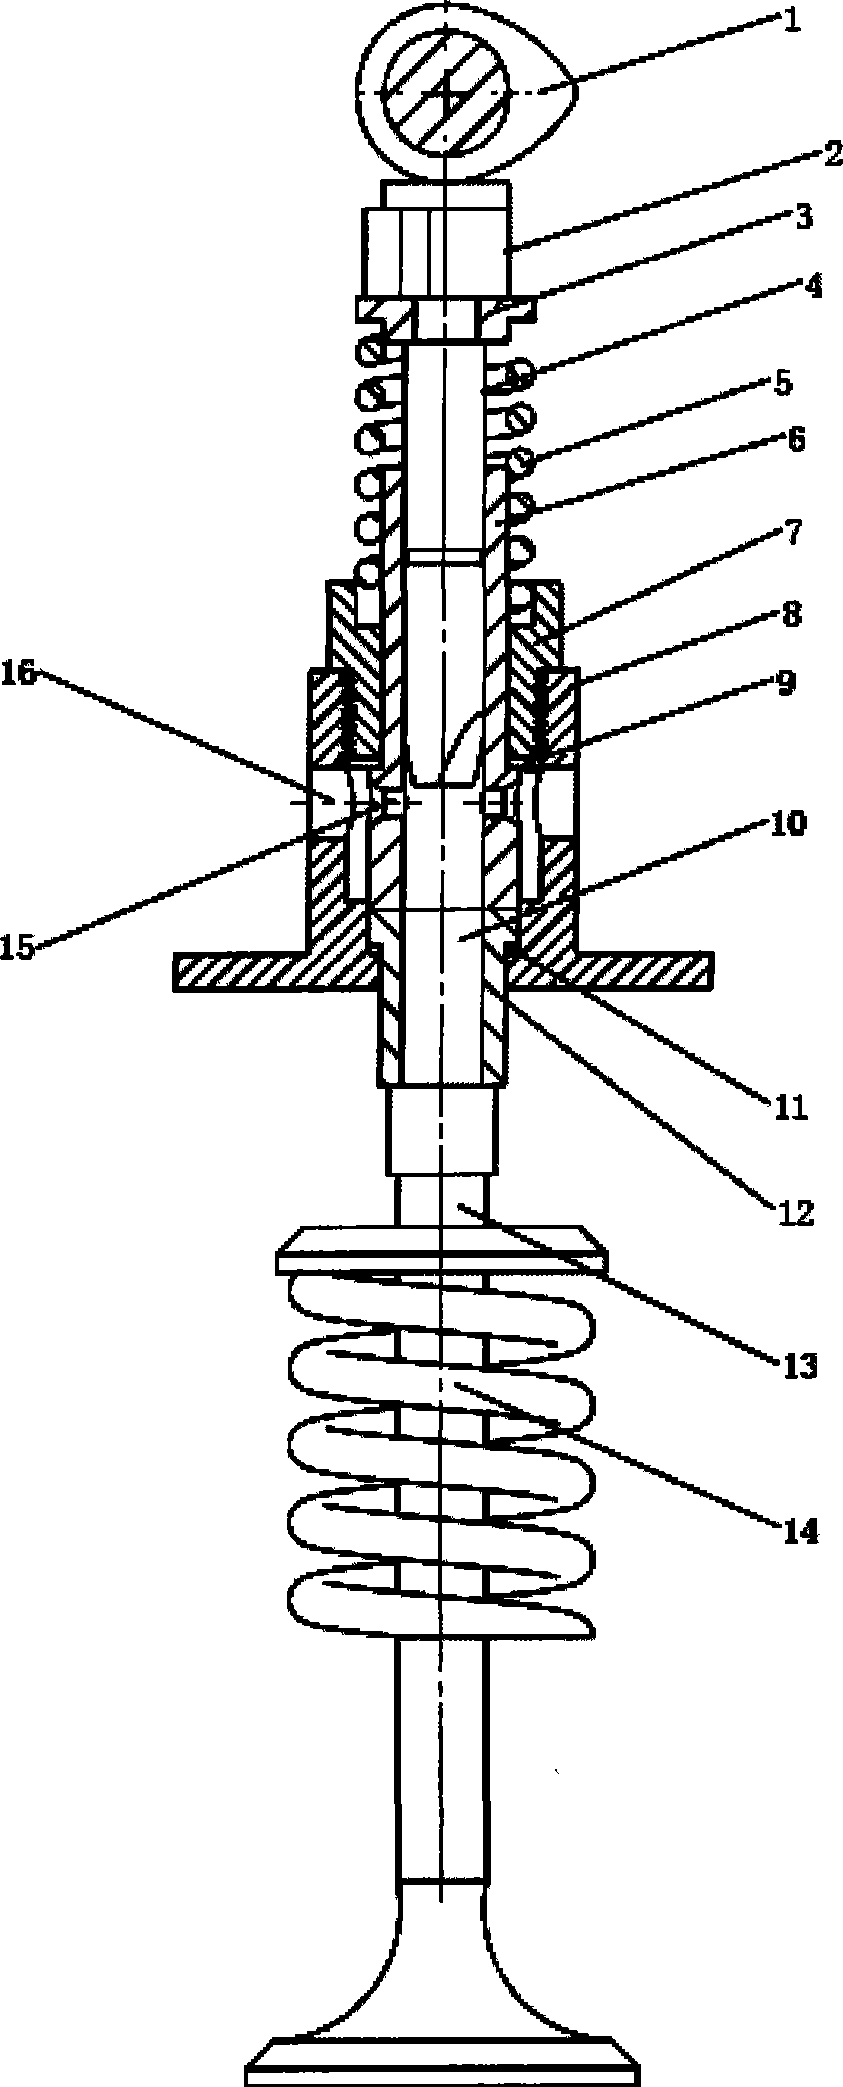 Continuously adjustable mechanical hydraulic valve lift device